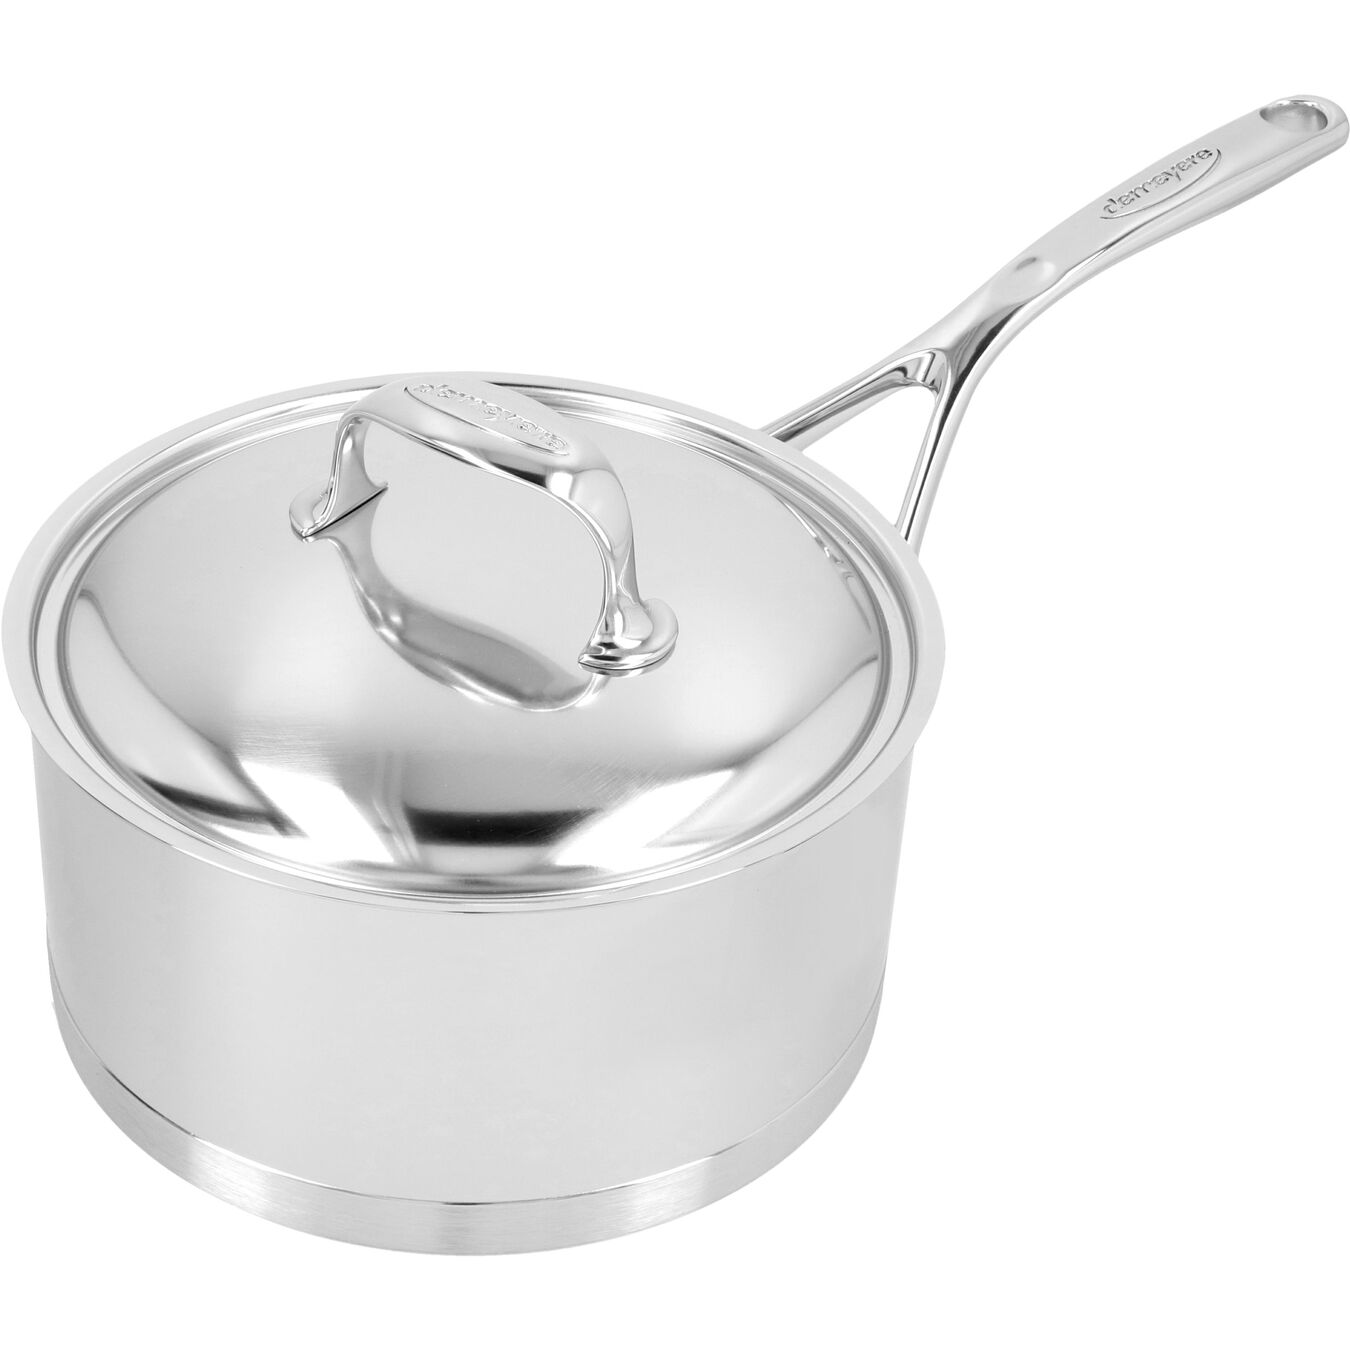 Demeyere Atlantis 7 Collection 3L 18/10 Stainless Steel Round Sauce Pan with Lid on 